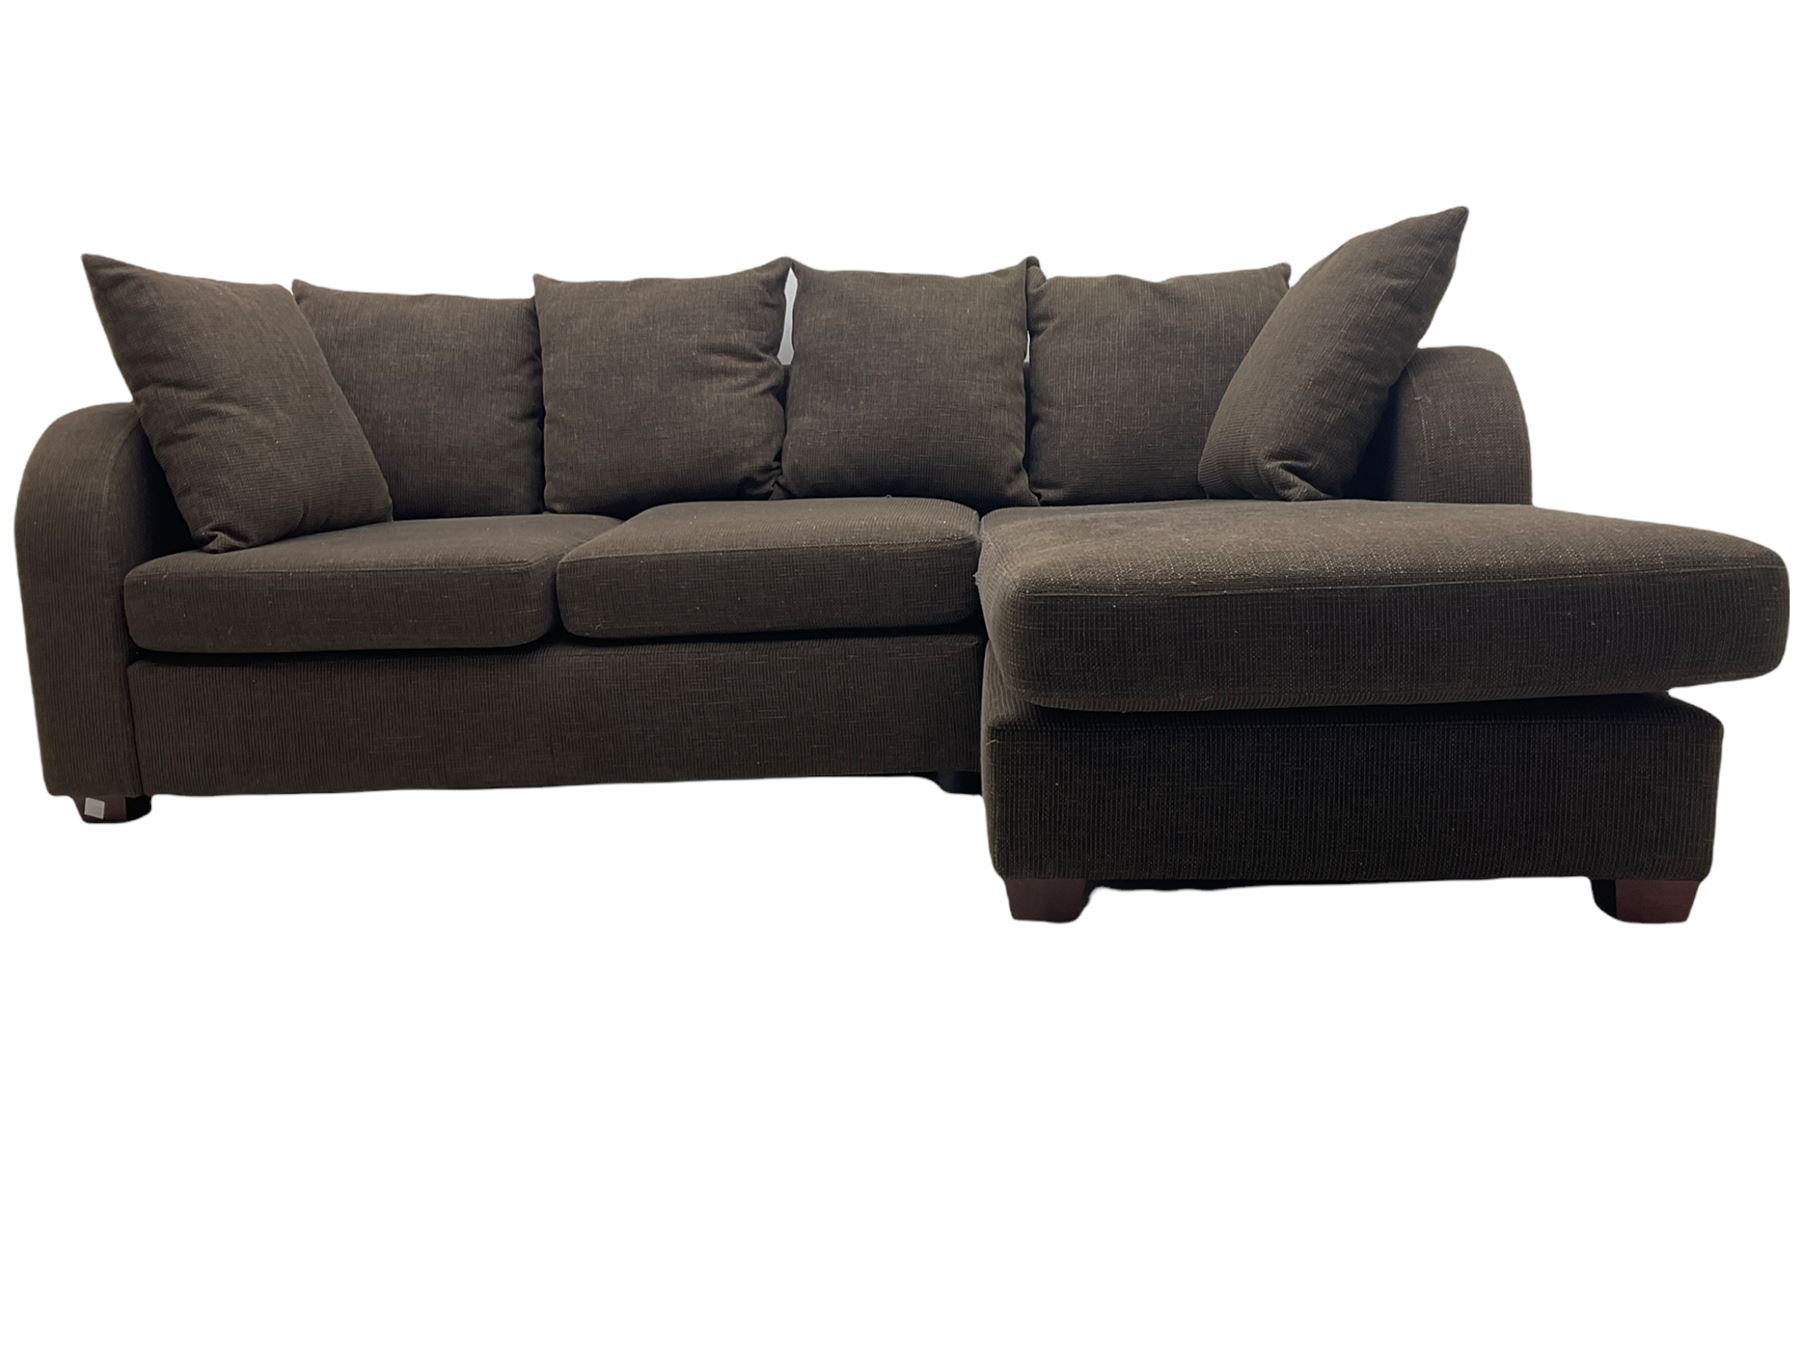 Corner sofa with right hand chaise - Image 6 of 8